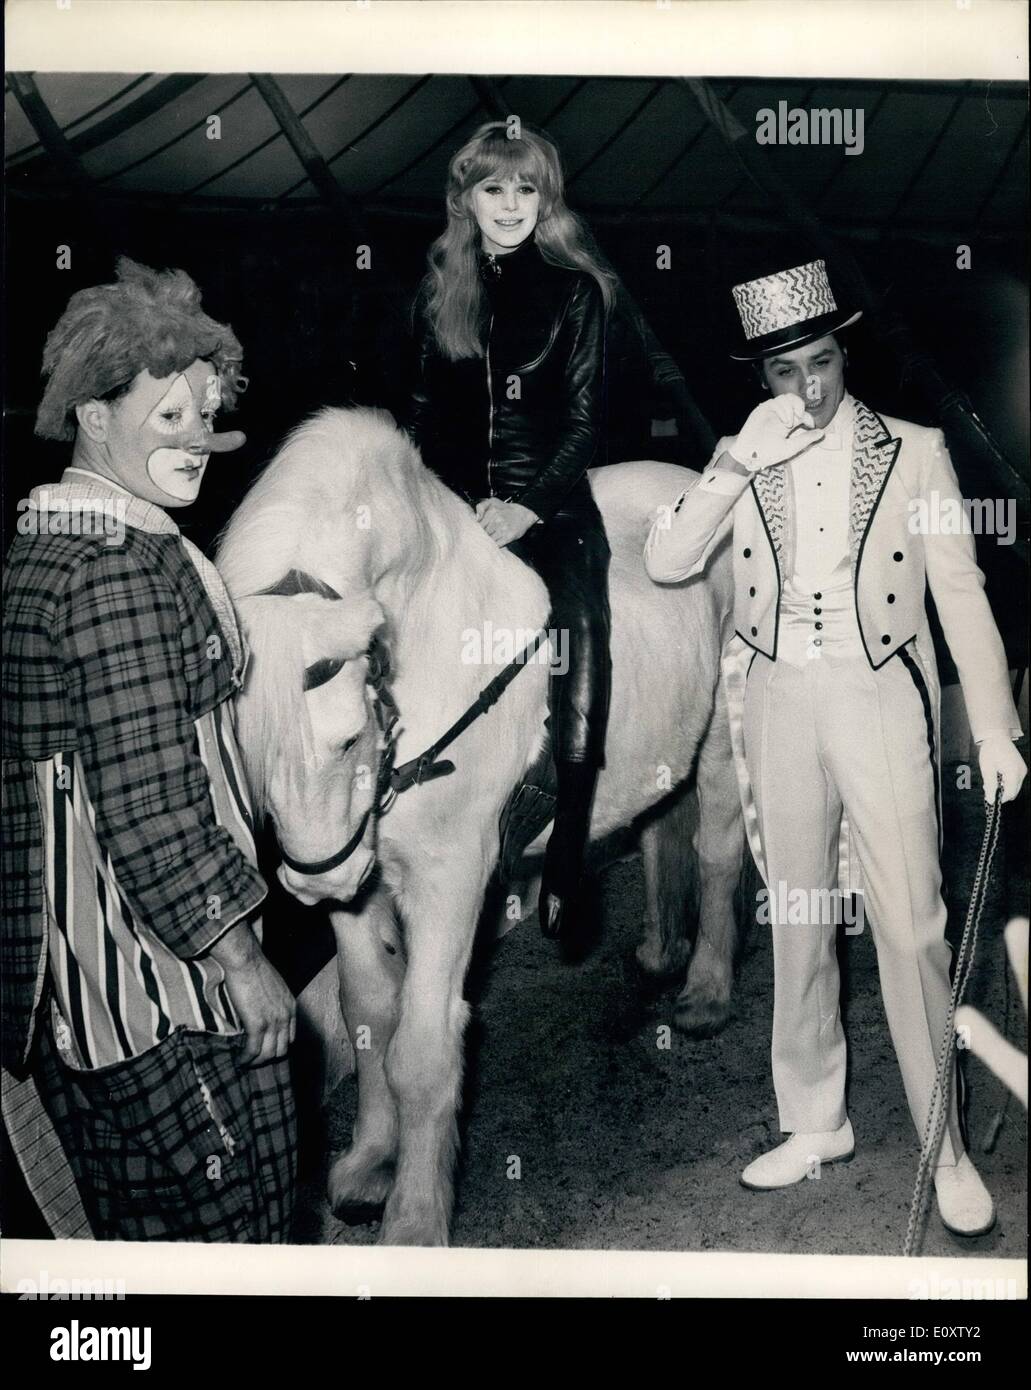 Nov. 17, 1967 - 17-11-67 Marianne Faithfull and Alain Delon at the circus for new film. Marianne Faithfull and Alain Delon, stars of the Anglo-French production Girl on a Motorcycle, spend a day at the circus for dream scenes in this lyrical love drama, directed by Jack Cardiff, and co-produced by William Sassoon and Sacha Kamenka, for distribution by British Lion. Wearing her black leather motor cycling suit designed especially for her by Lanvin, Marianne circles round the sawdust ring on a circus horse while Alain who plays her lover Daniel in the film crack a commanding whip as ringmaster Stock Photo